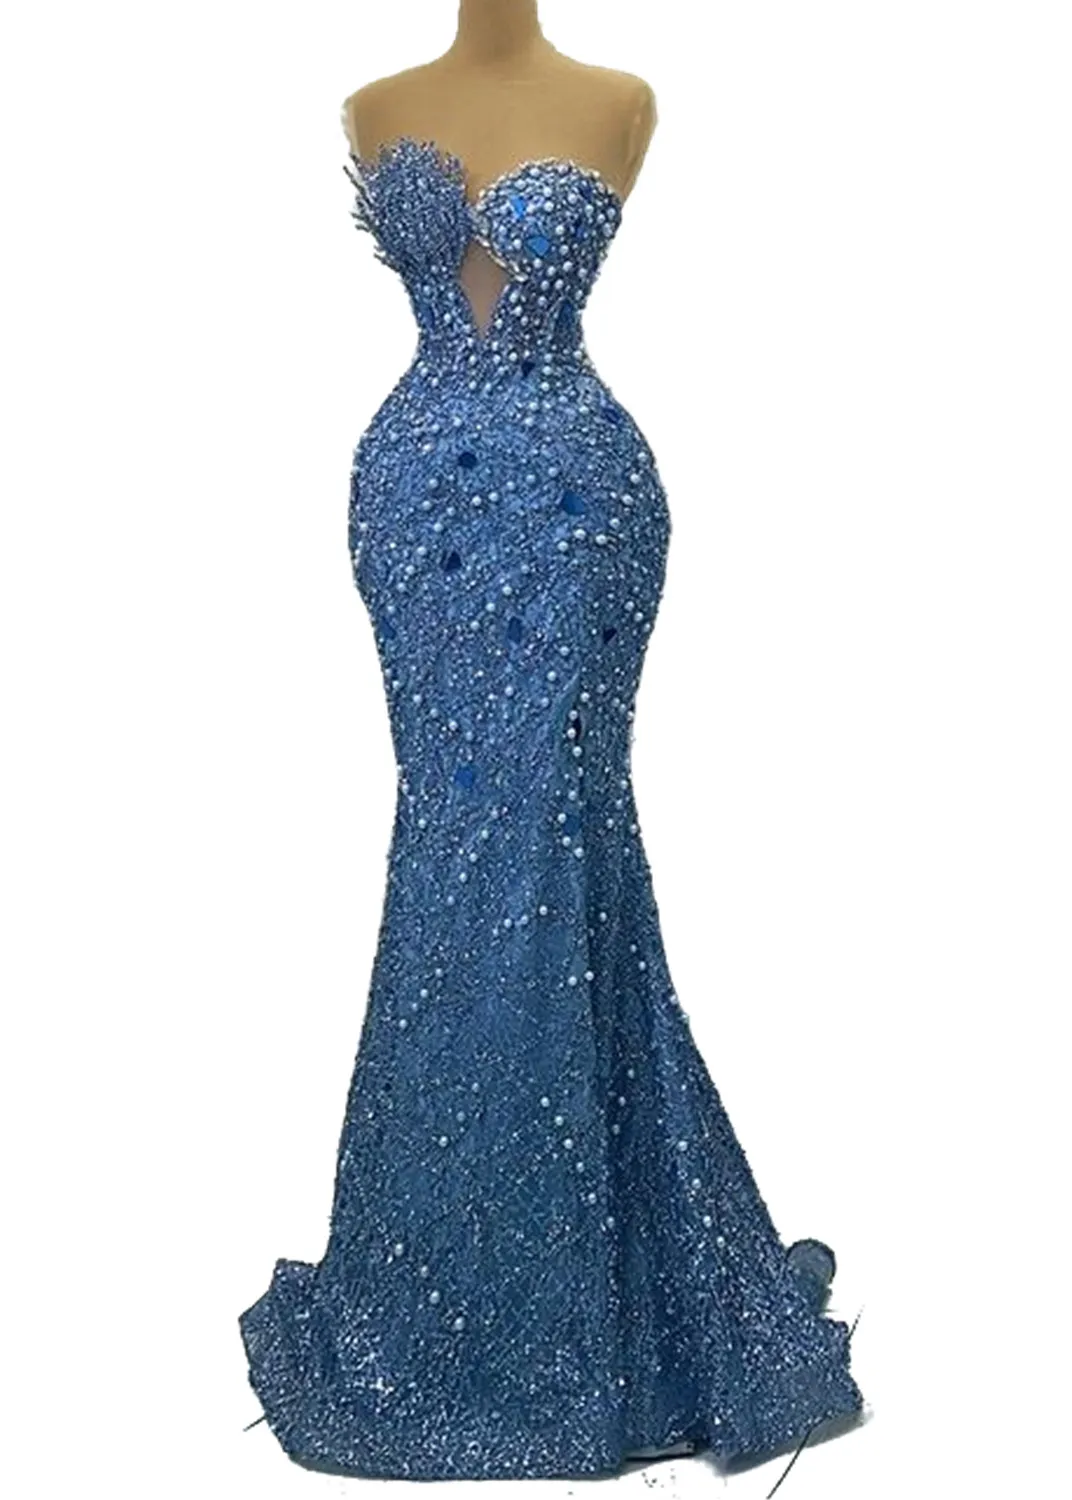 2023 April Aso Ebi Mermaid Crystals Prom Dress Sequined Lace Luxurious Evening Formal Party Second Reception Birthday Engagement Gowns Dresses Robe De Soiree ZJ581